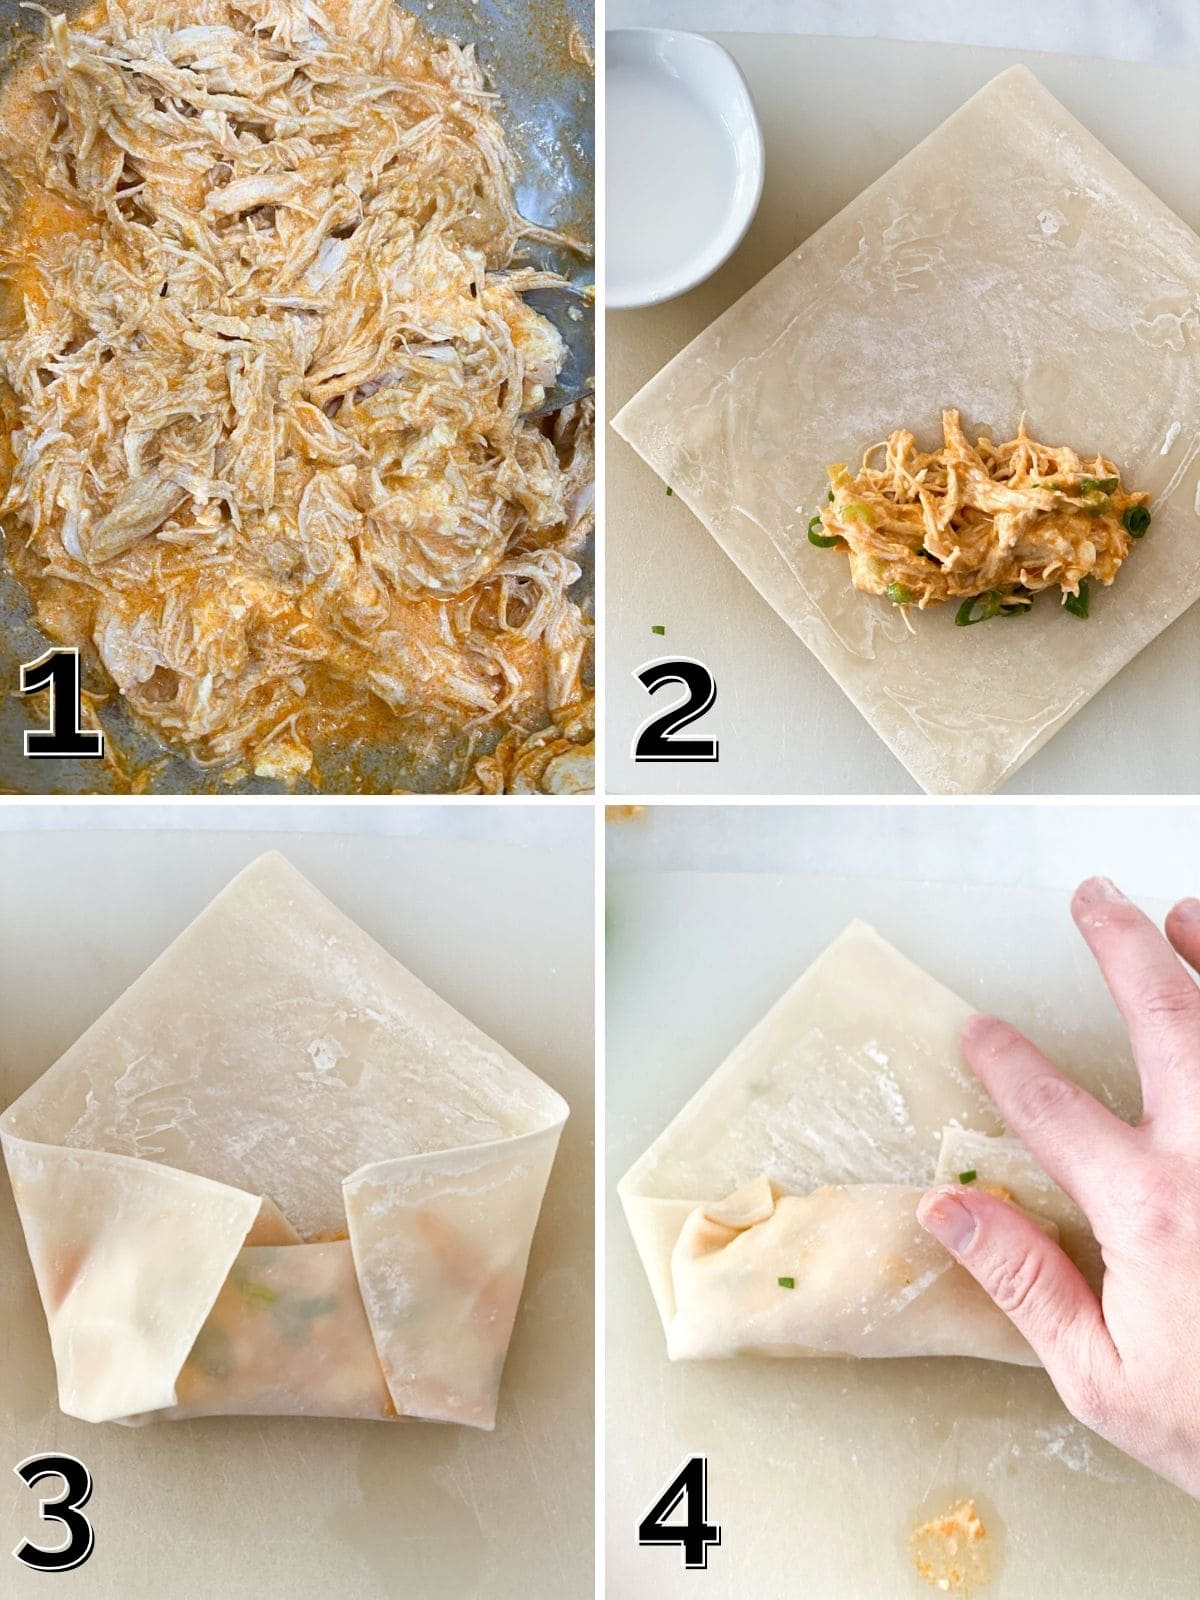 Step by step photos showing how to roll a buffalo chicken egg roll.